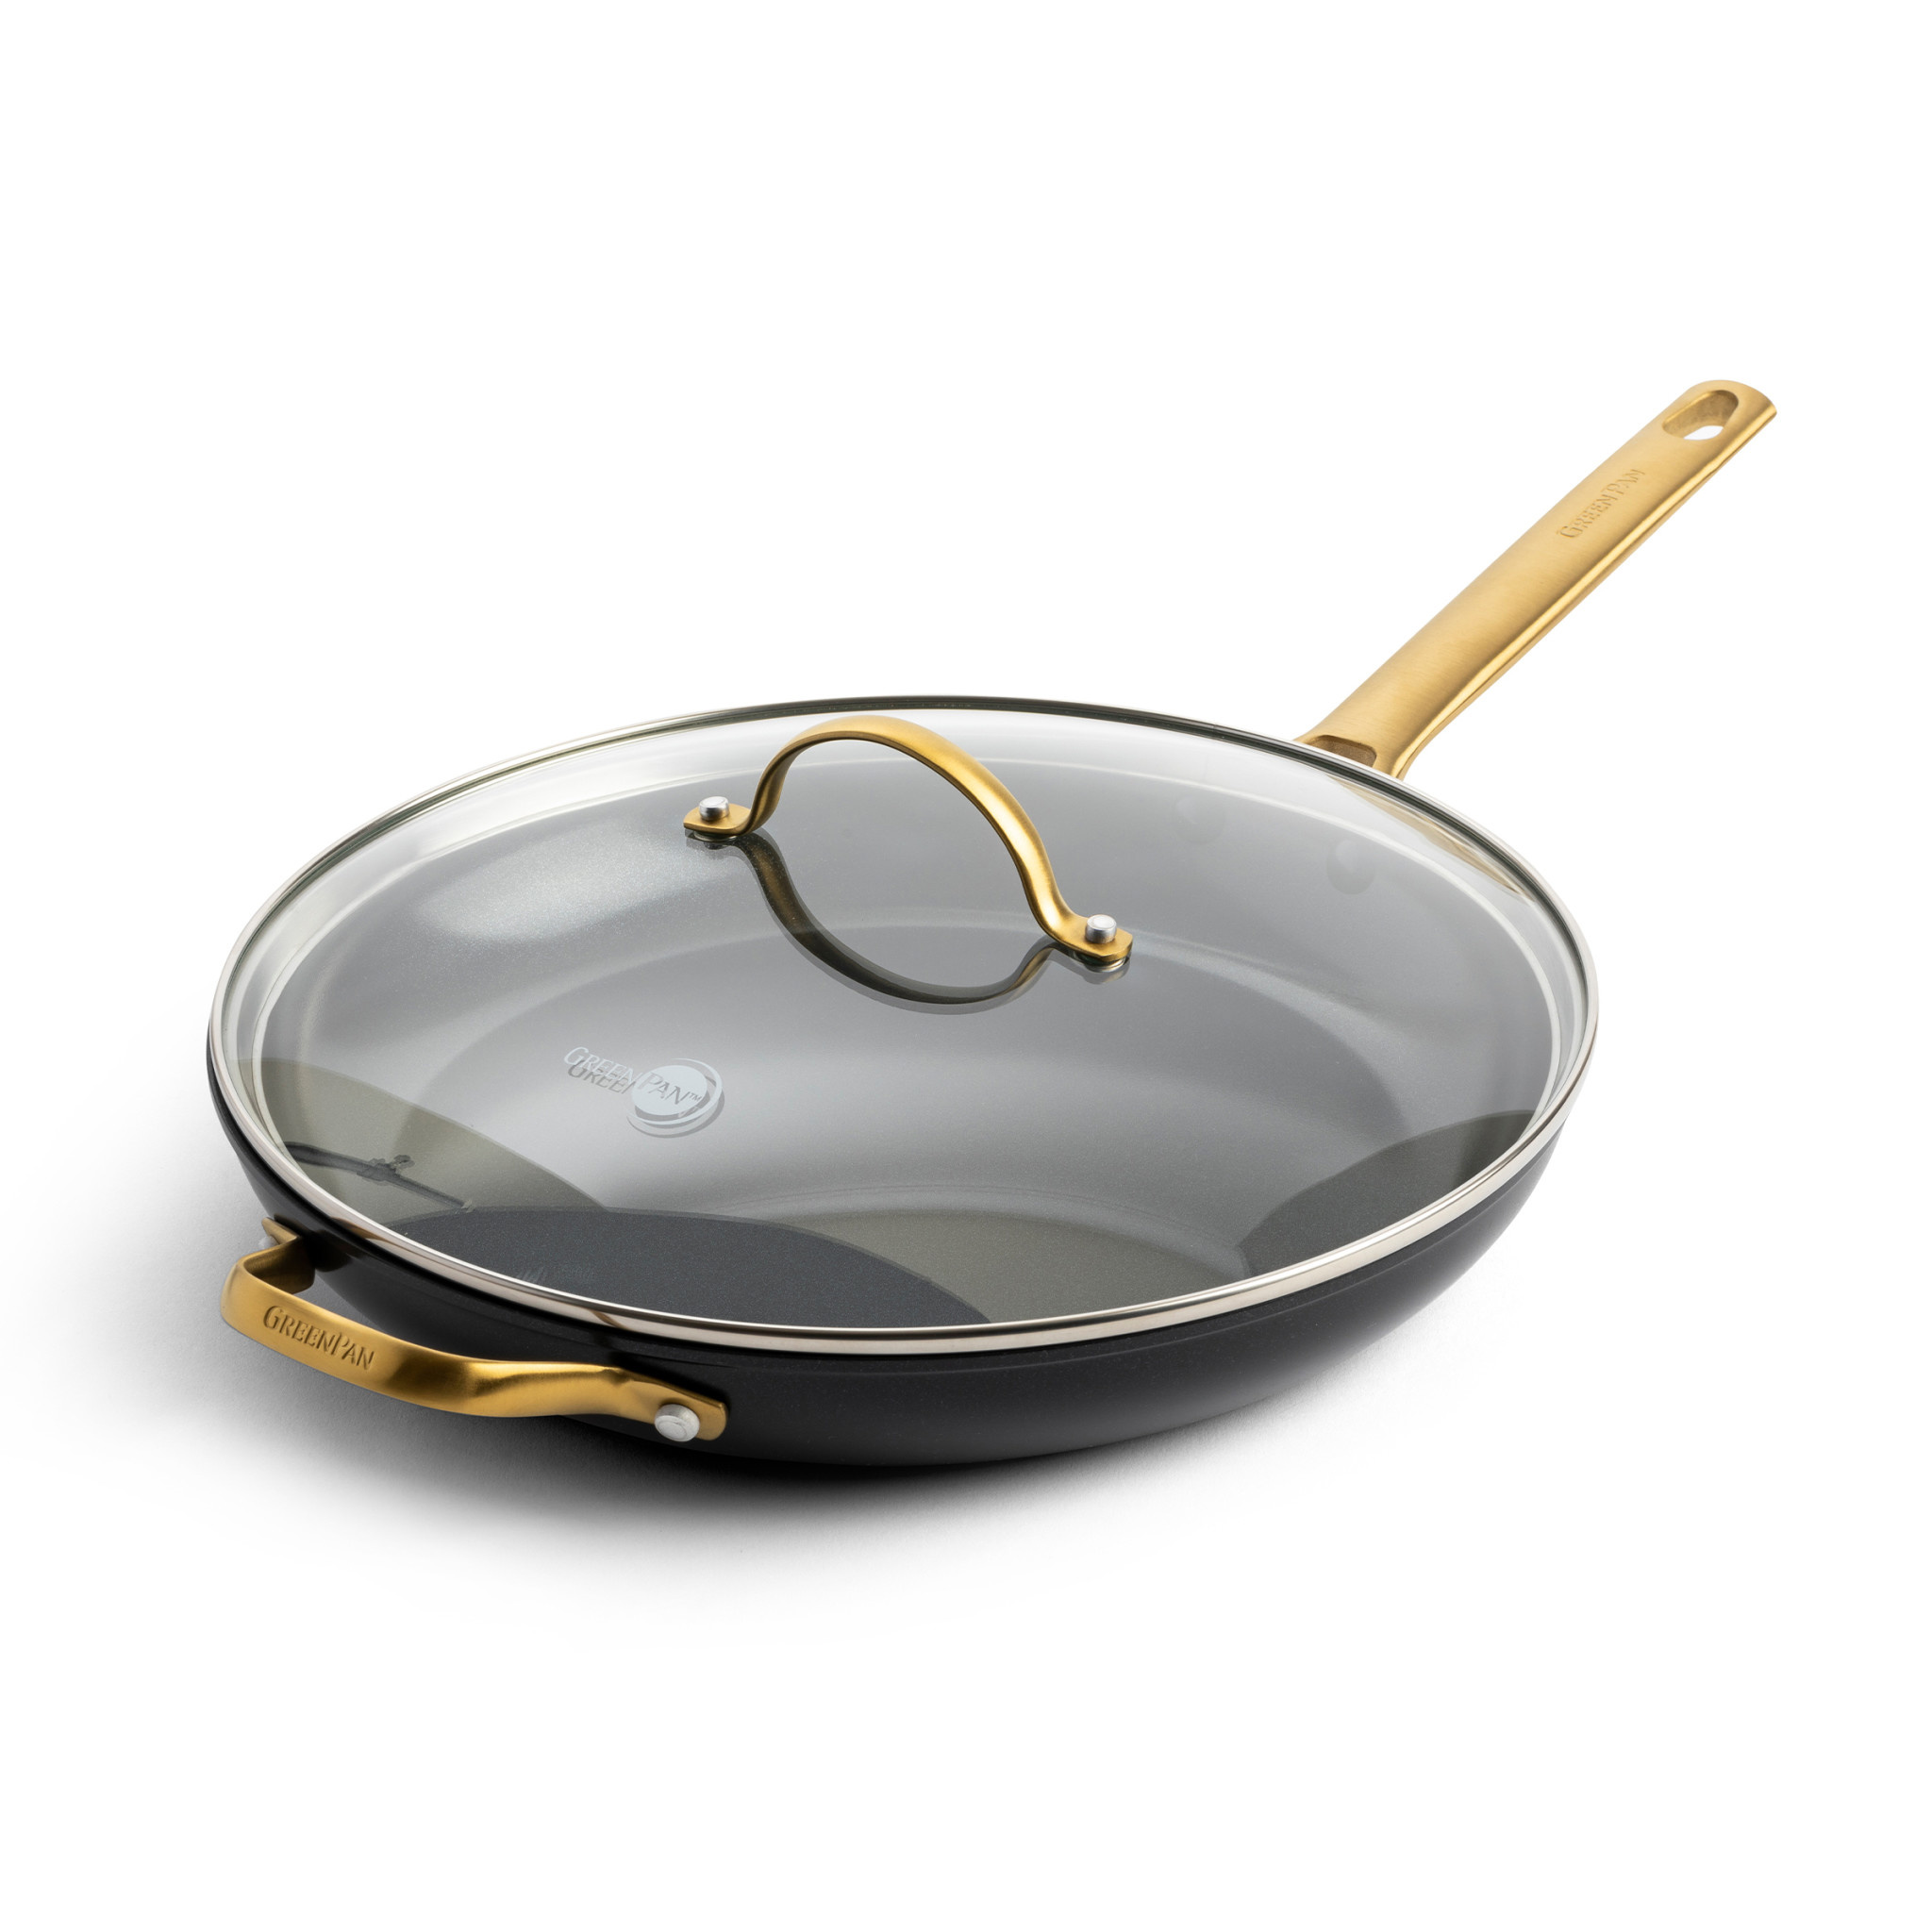 Anodized Advanced Healthy Ceramic Nonstick, 8 Frying Pan Skillet